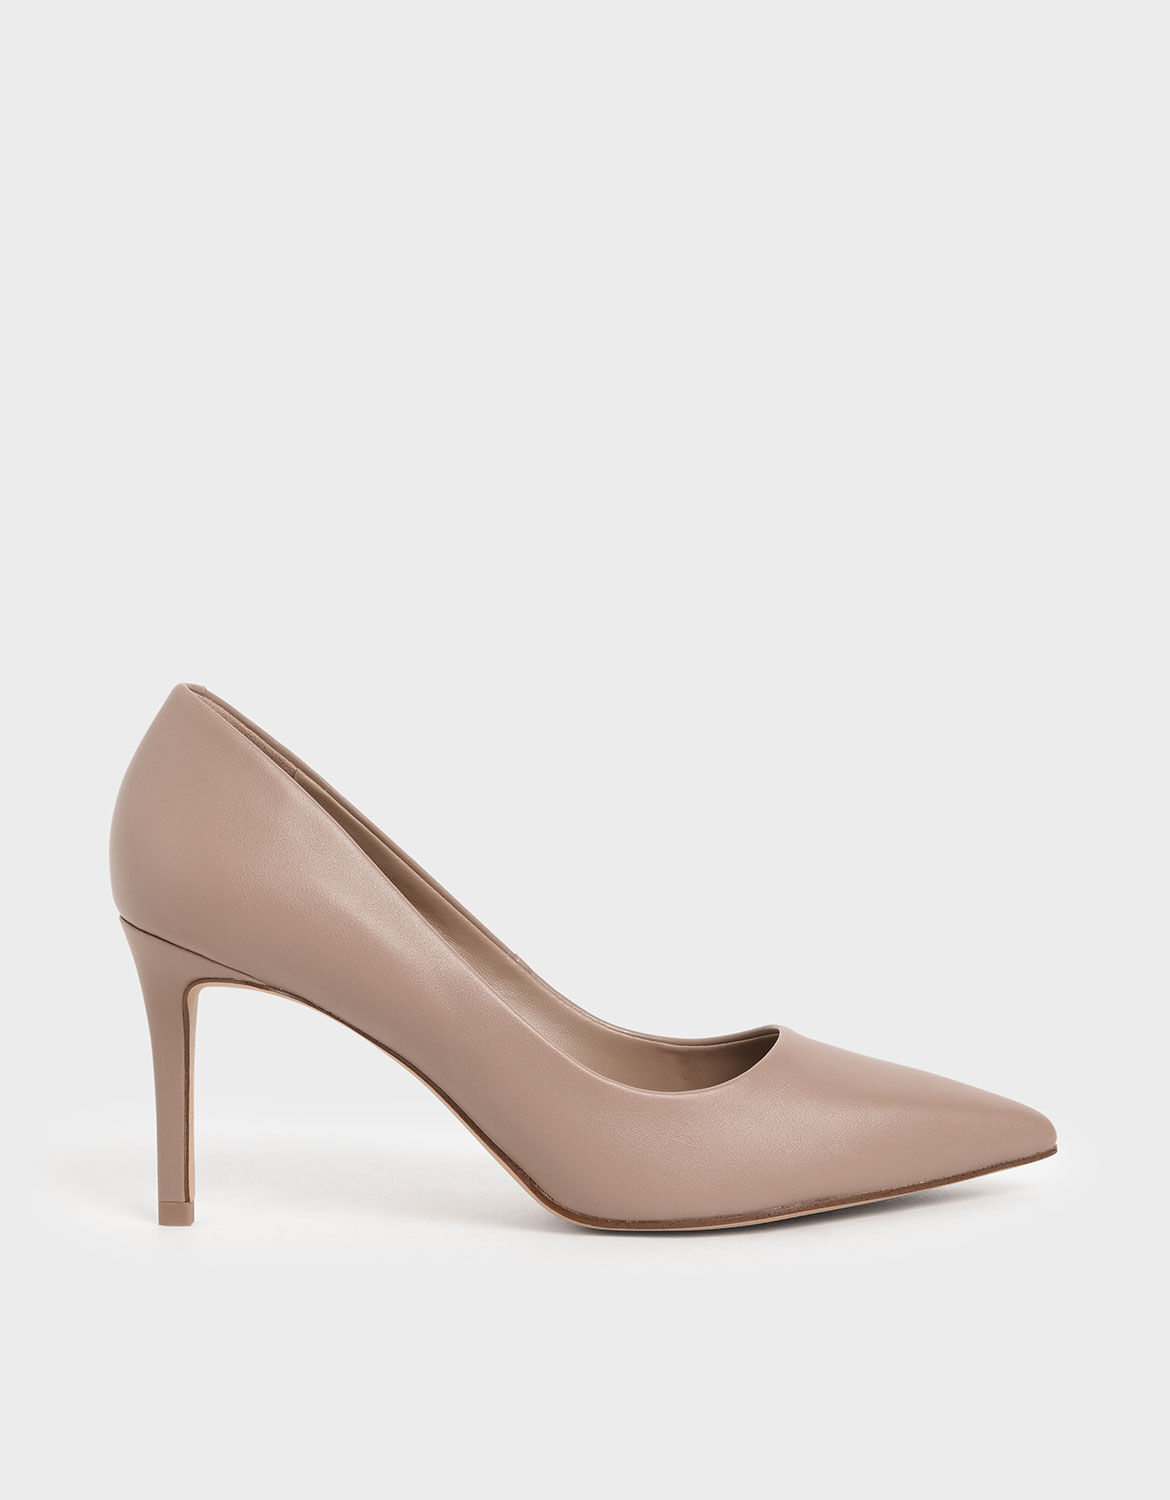 pink pointed pumps